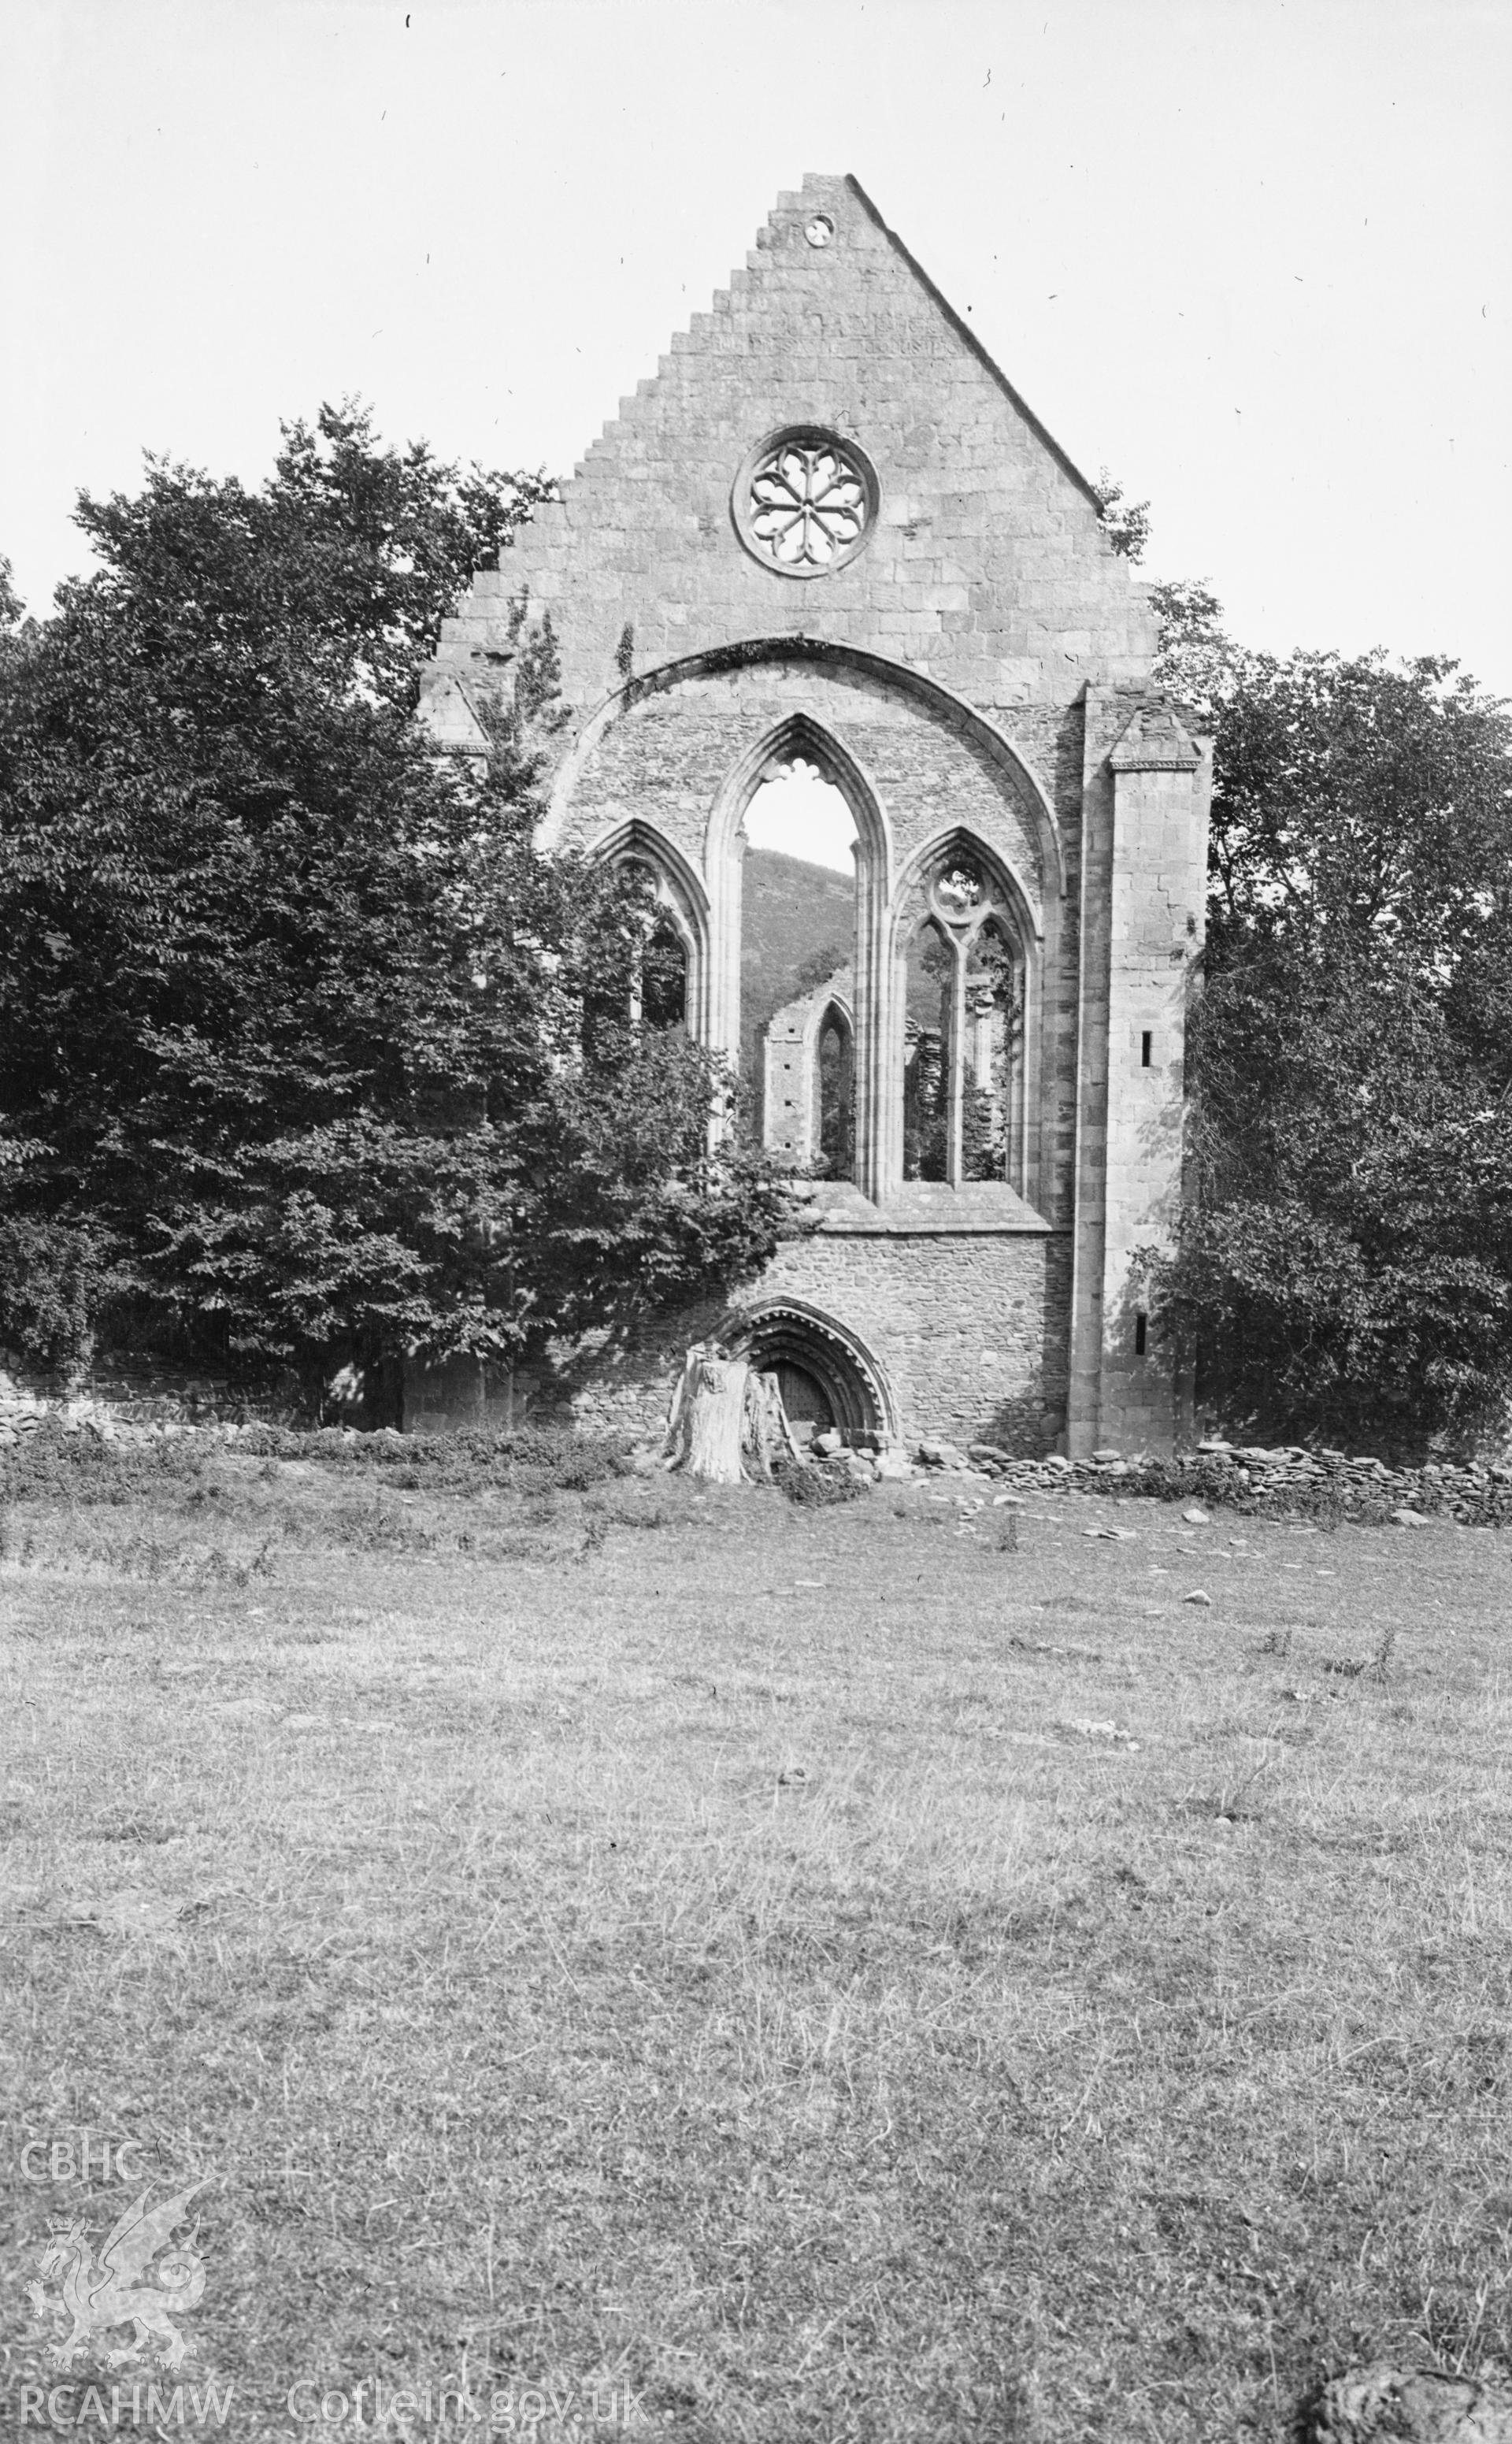 Digital copy of a nitrate negative showing view of Valle Crucis Abbey